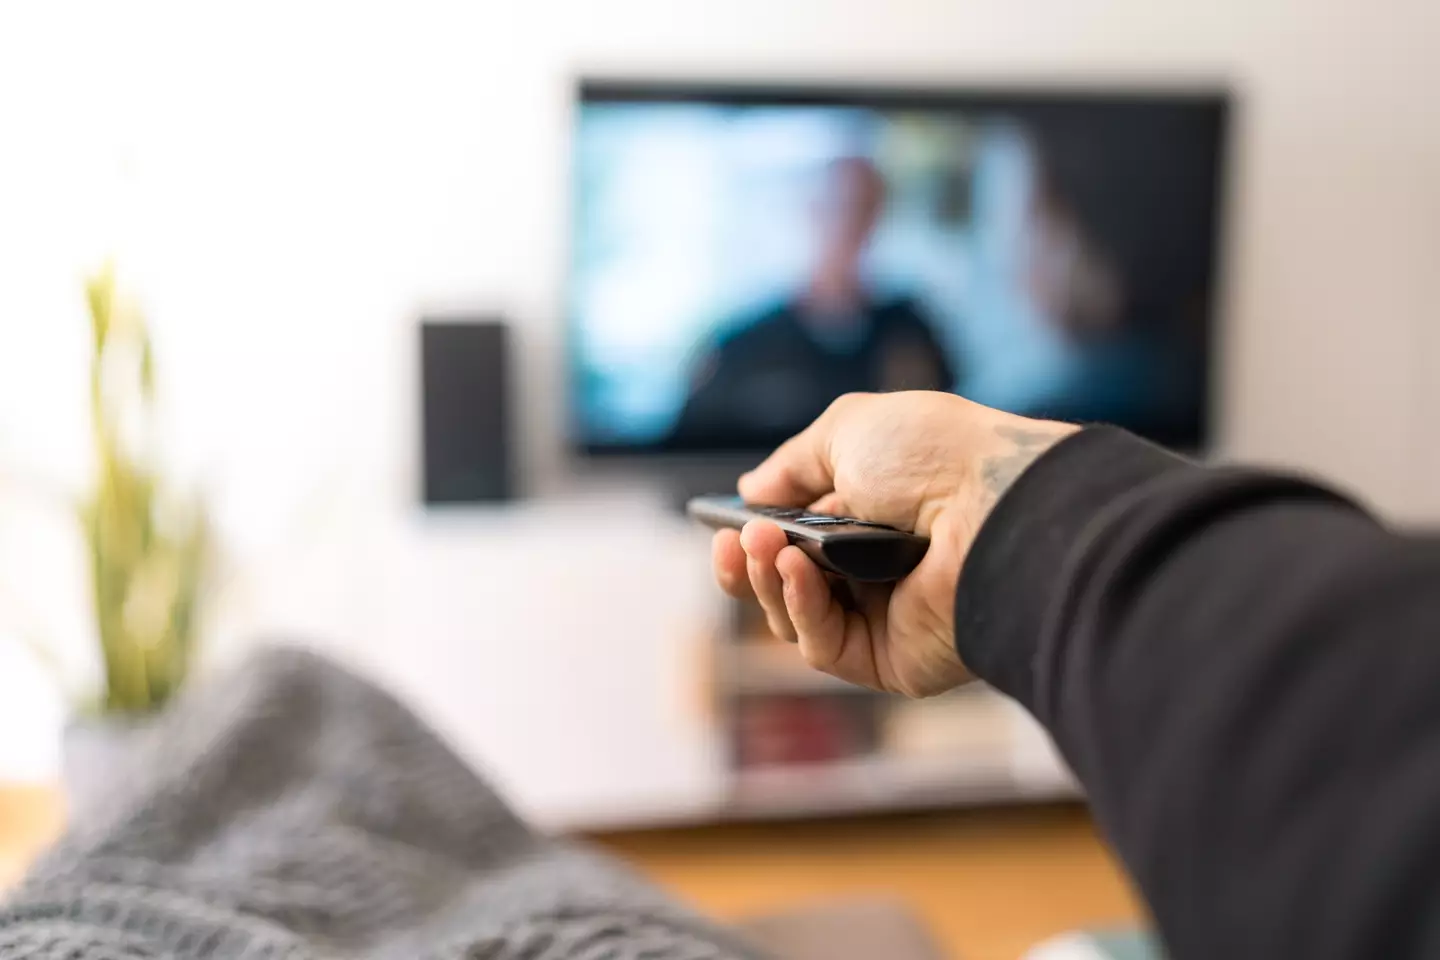 IPTV is often used to illegally access copyrighted films, shows, and premium live TV. (Getty Stock Images)